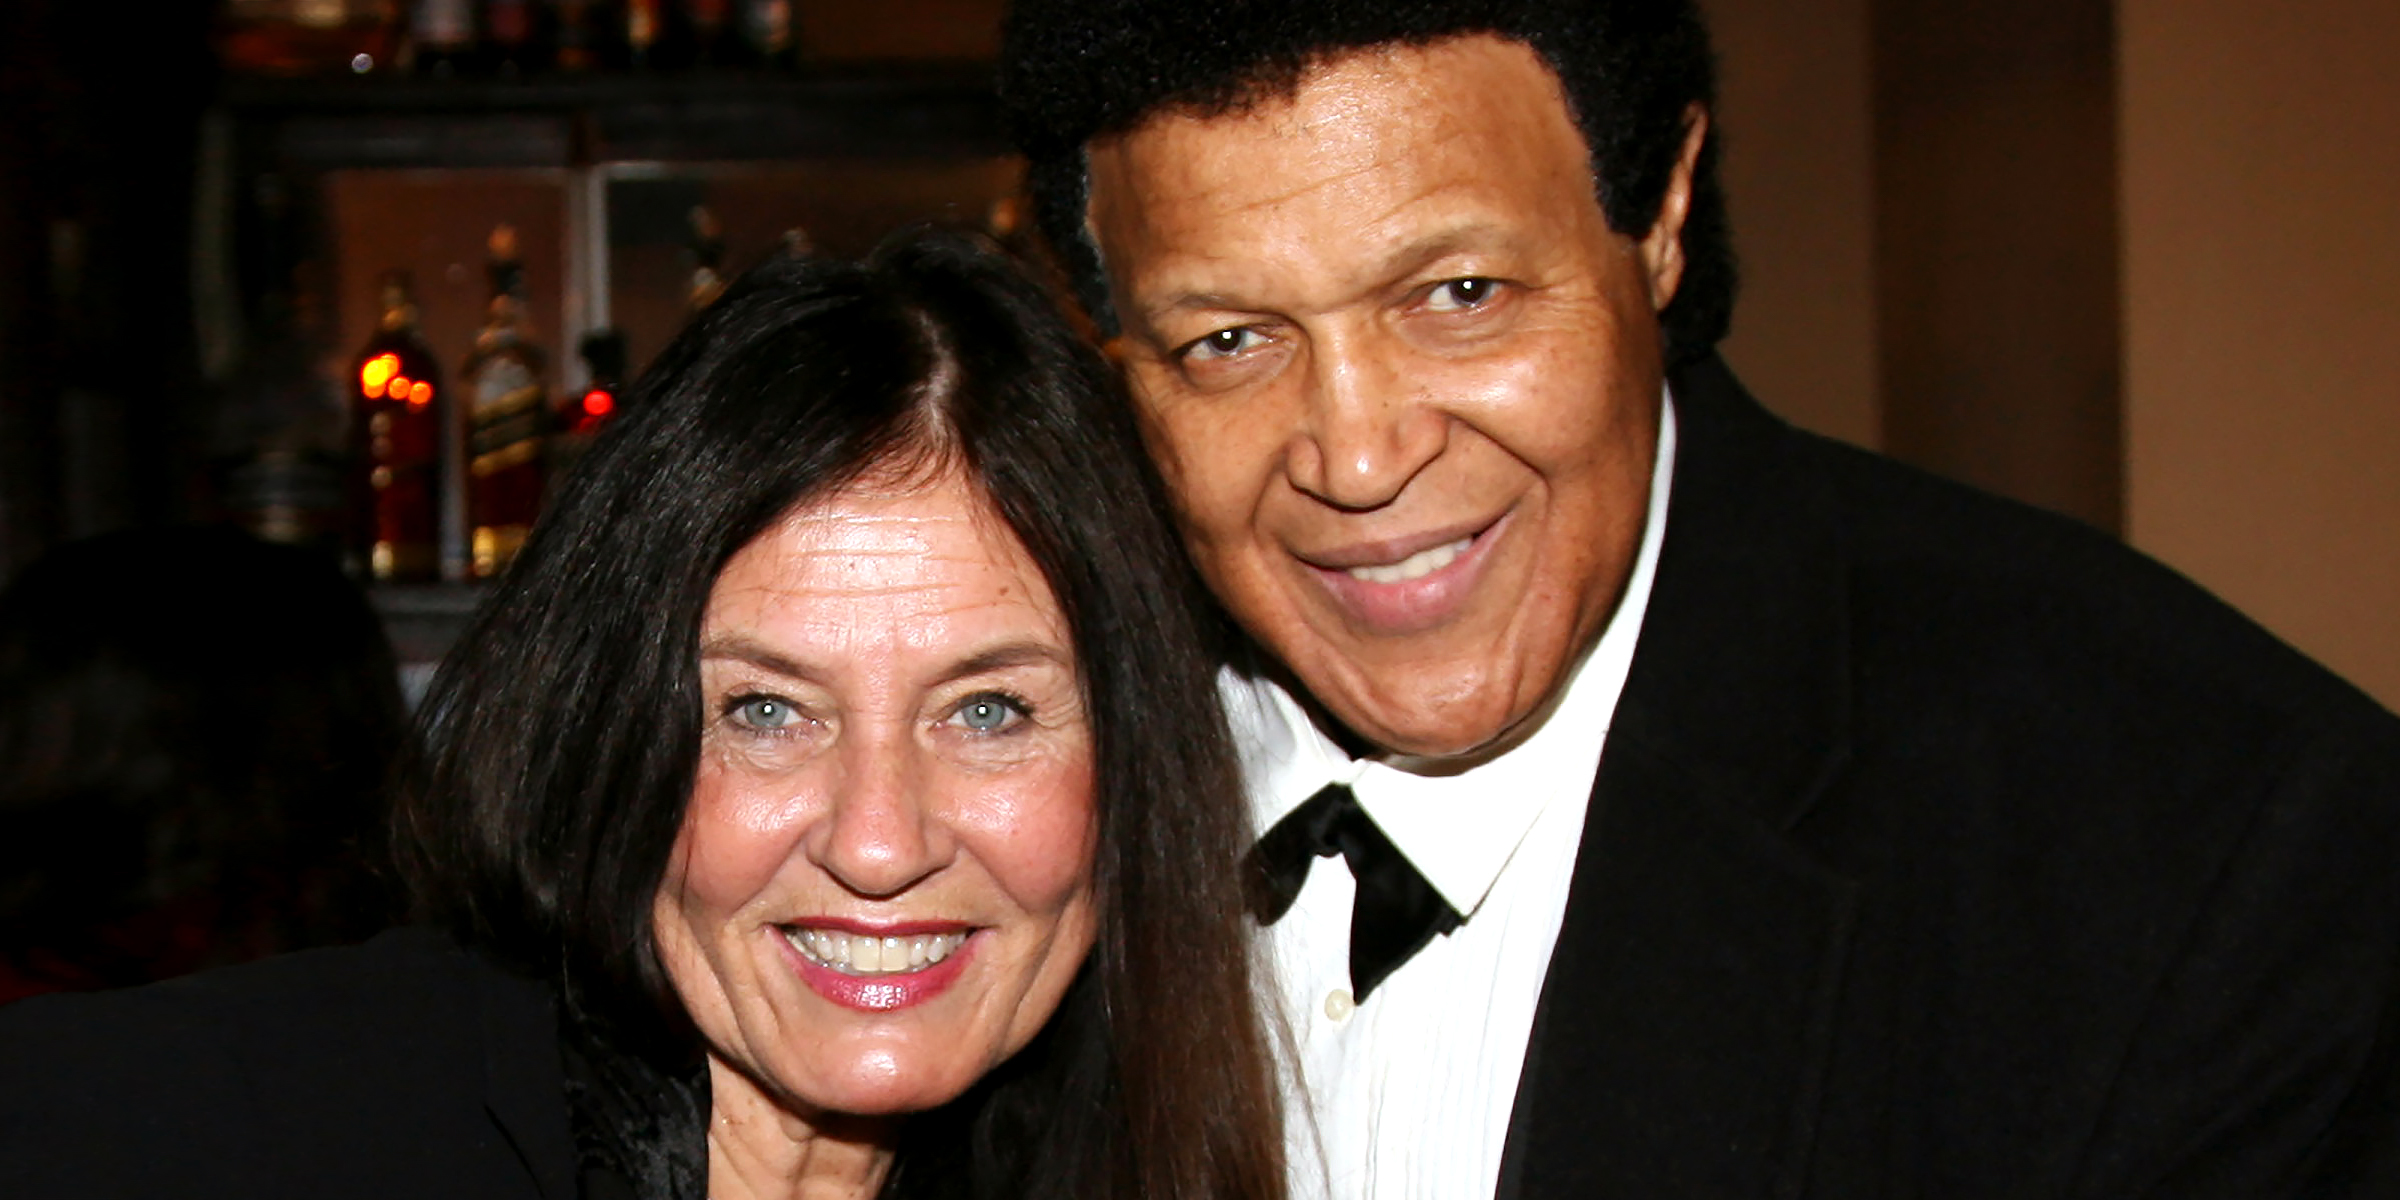 Catharina Lodders and Chubby Checker | Source: Getty Images